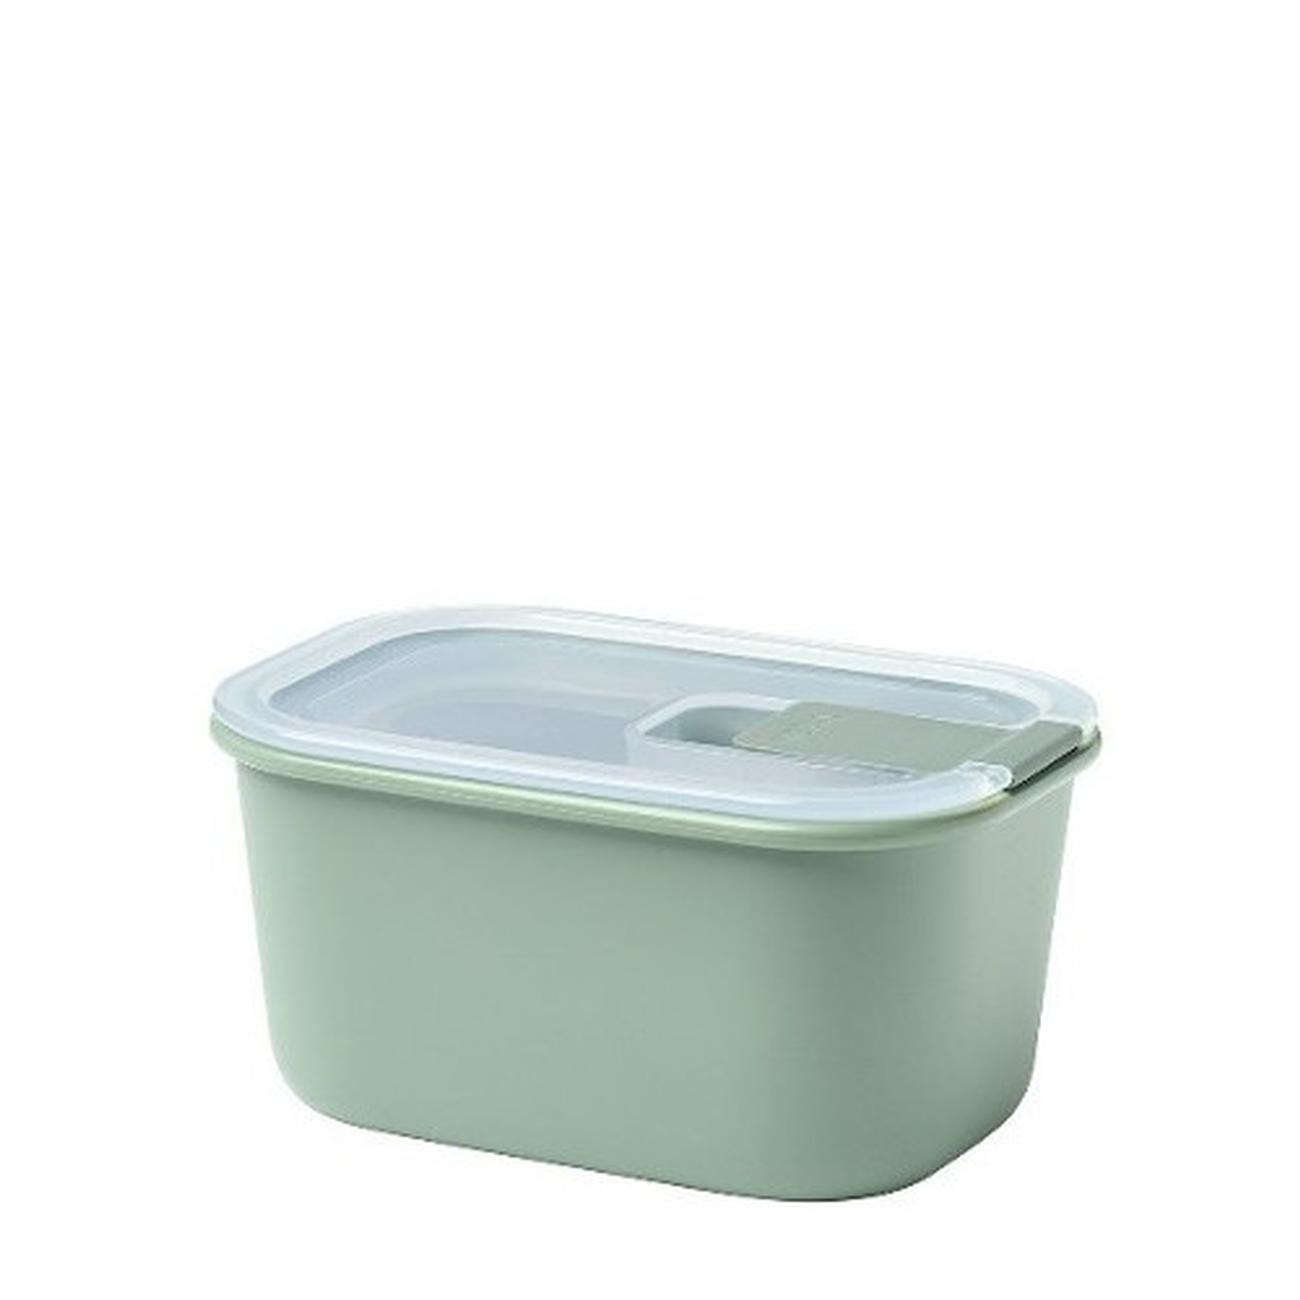 https://www.thekitchenwhisk.ie/contentfiles/productImages/Large/mepal-food-storage-easy-clip-450ml-nordic-sage.jpg